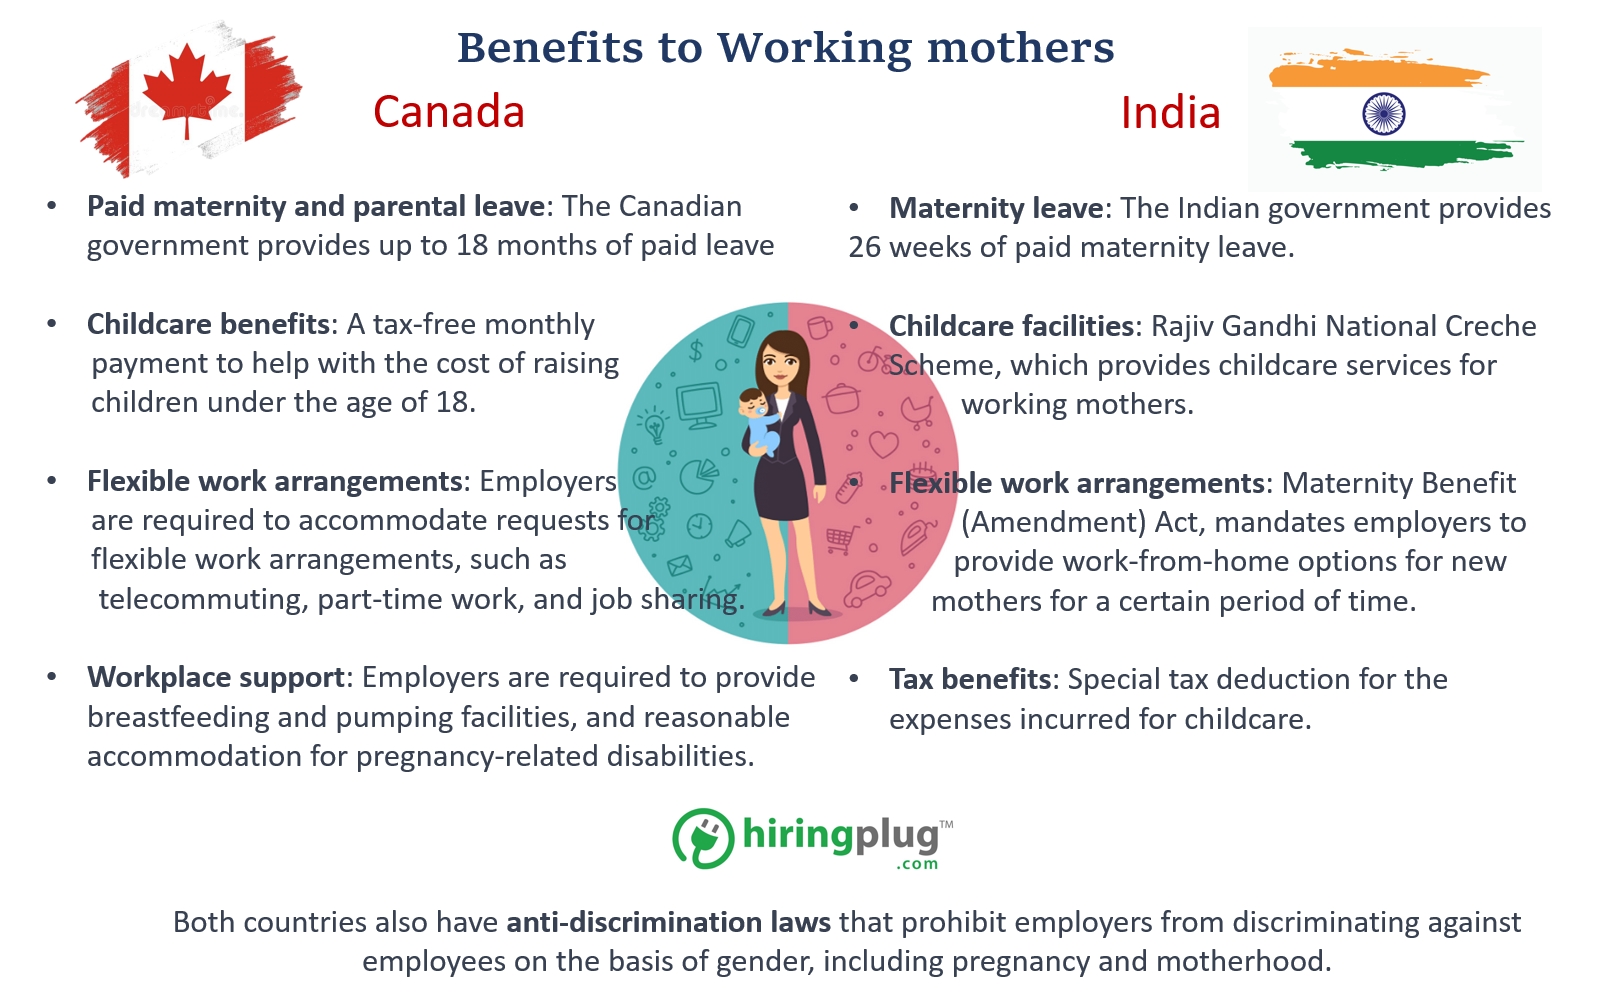 Benefits to Working Mothers in Canada and India by hiringplug